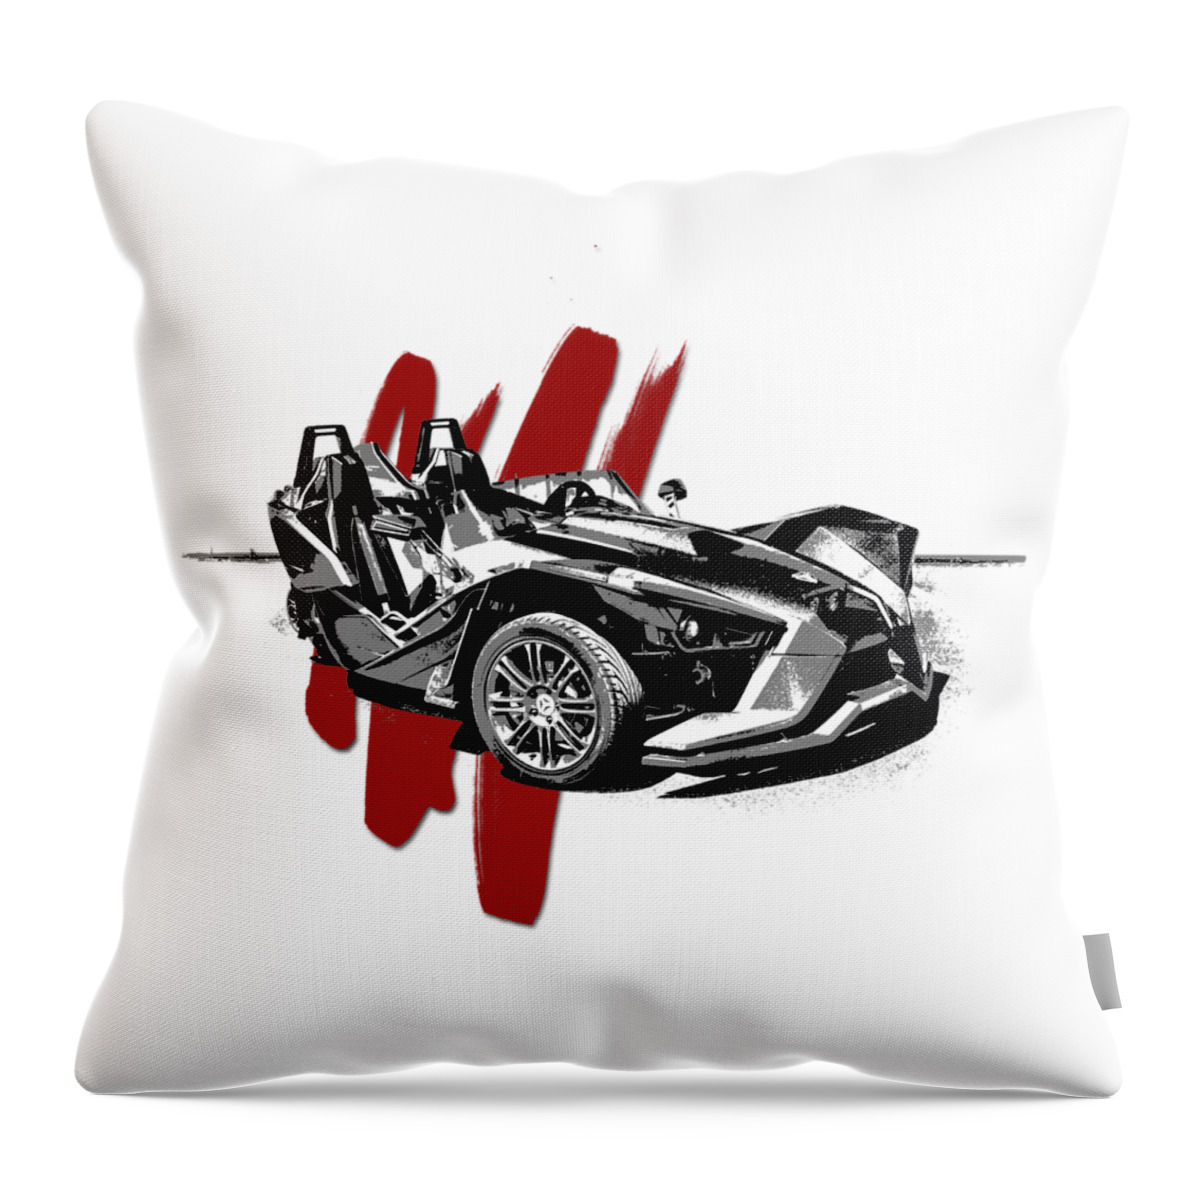 2015 Throw Pillow featuring the digital art Polaris Slingshot Graphic by Melissa Smith